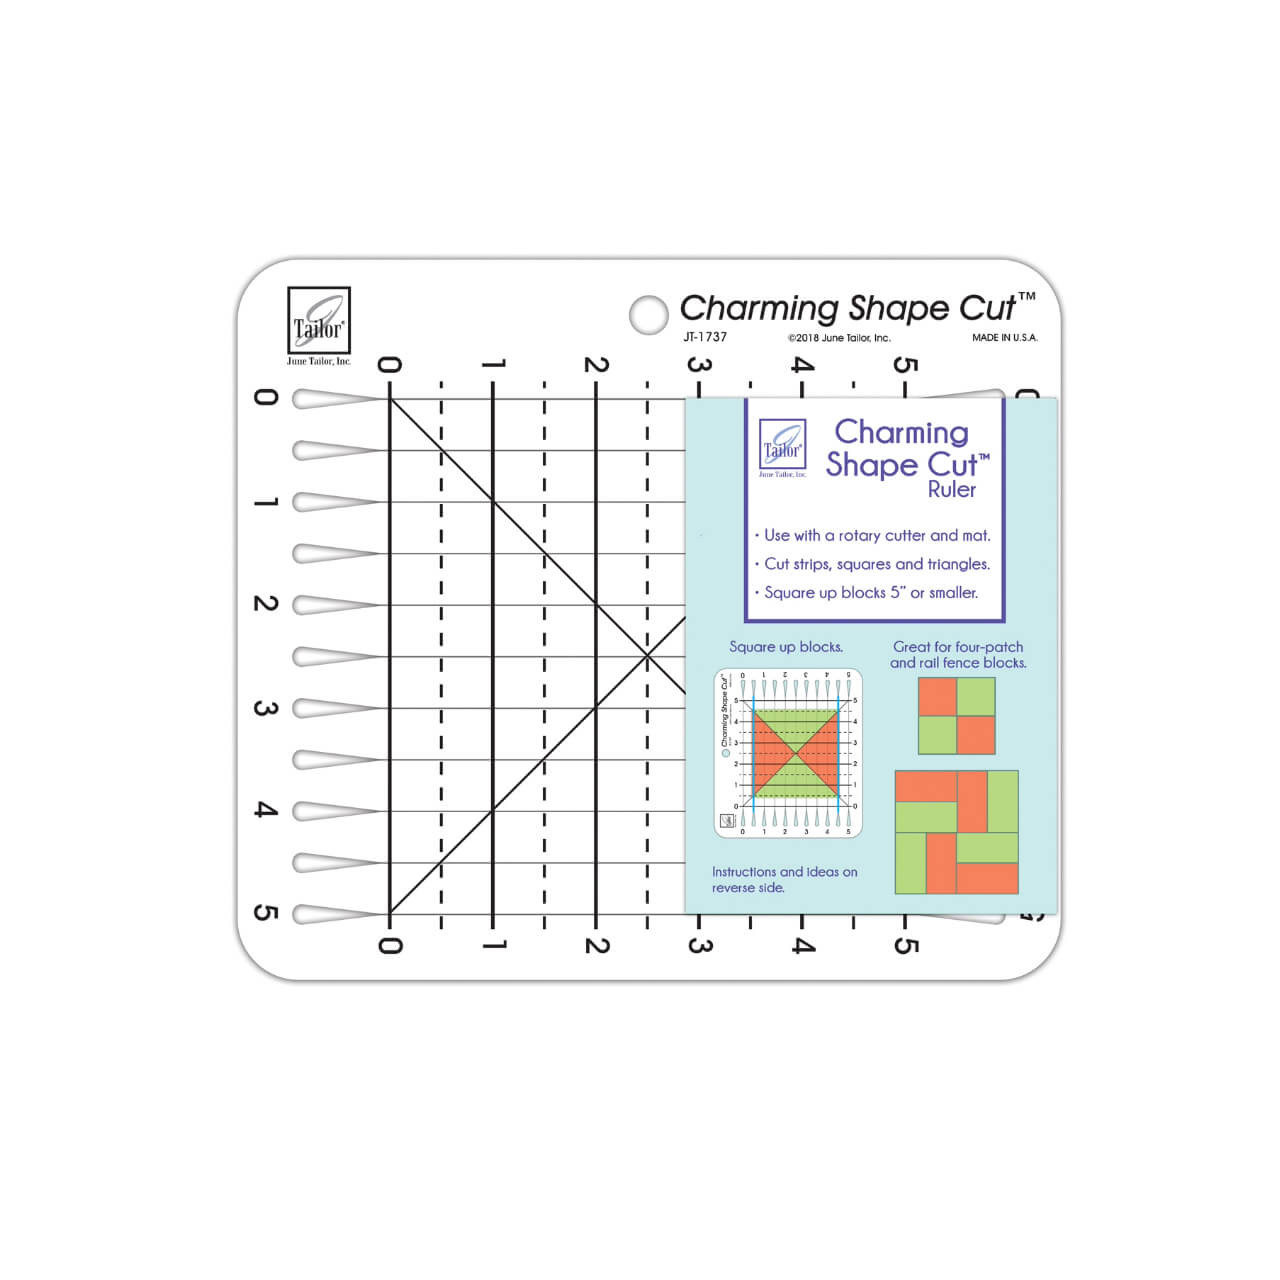 June Tailor Charming Shape Cut Ruler with 5-inch grid and slots for cutting, detailed packaging information visible in the background